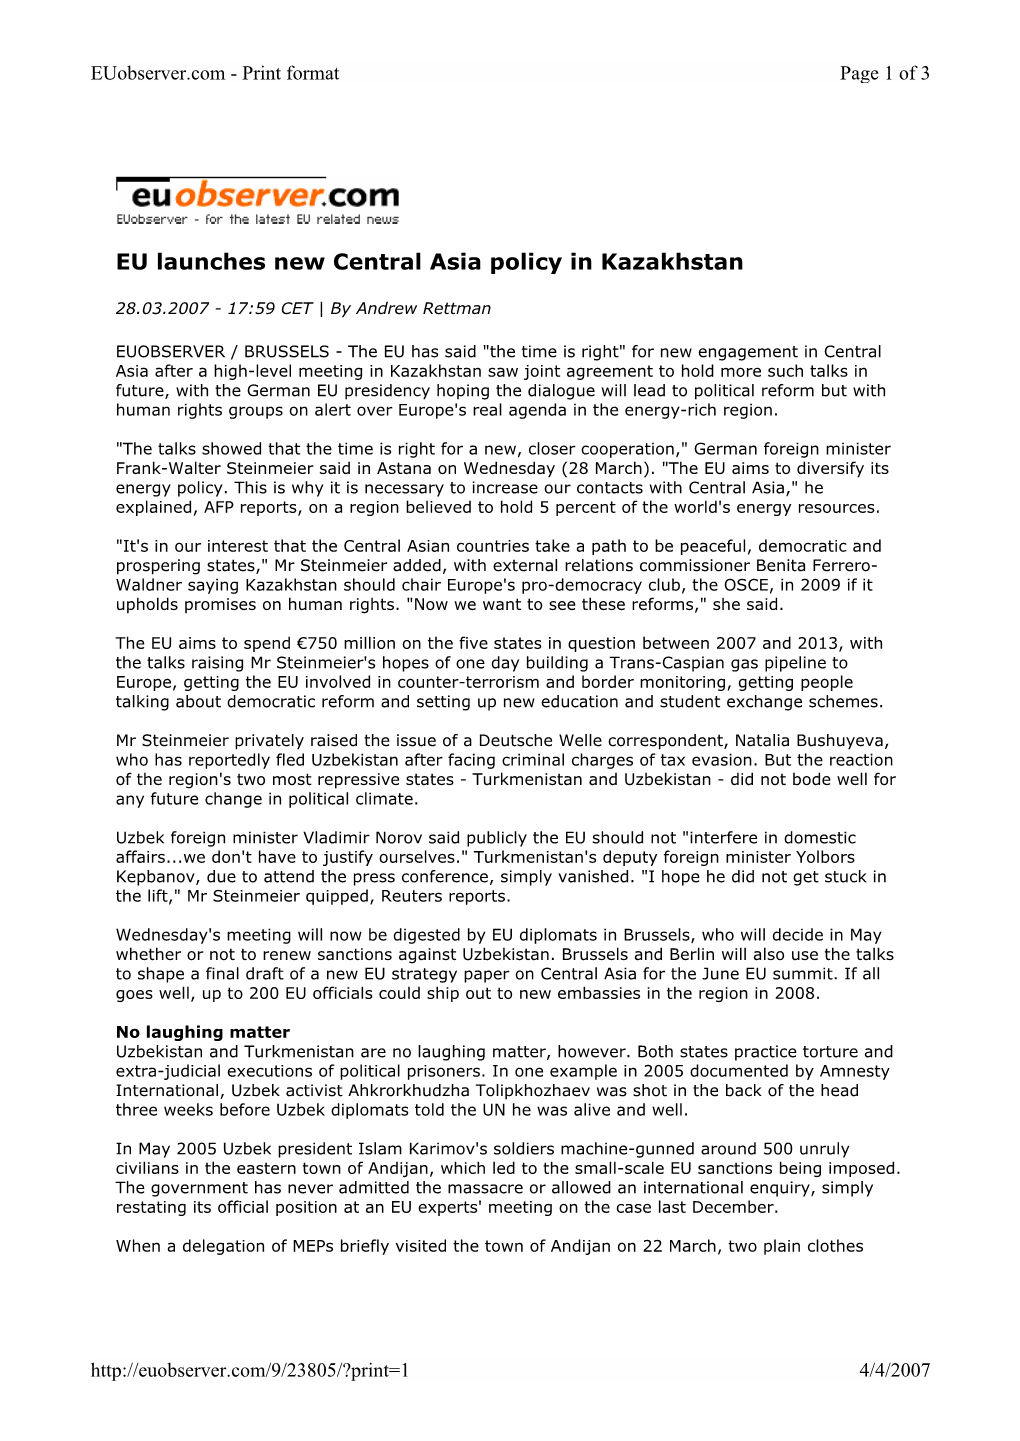 4/4/2007 Euobserver.Com - Print Format Page 2 of 3